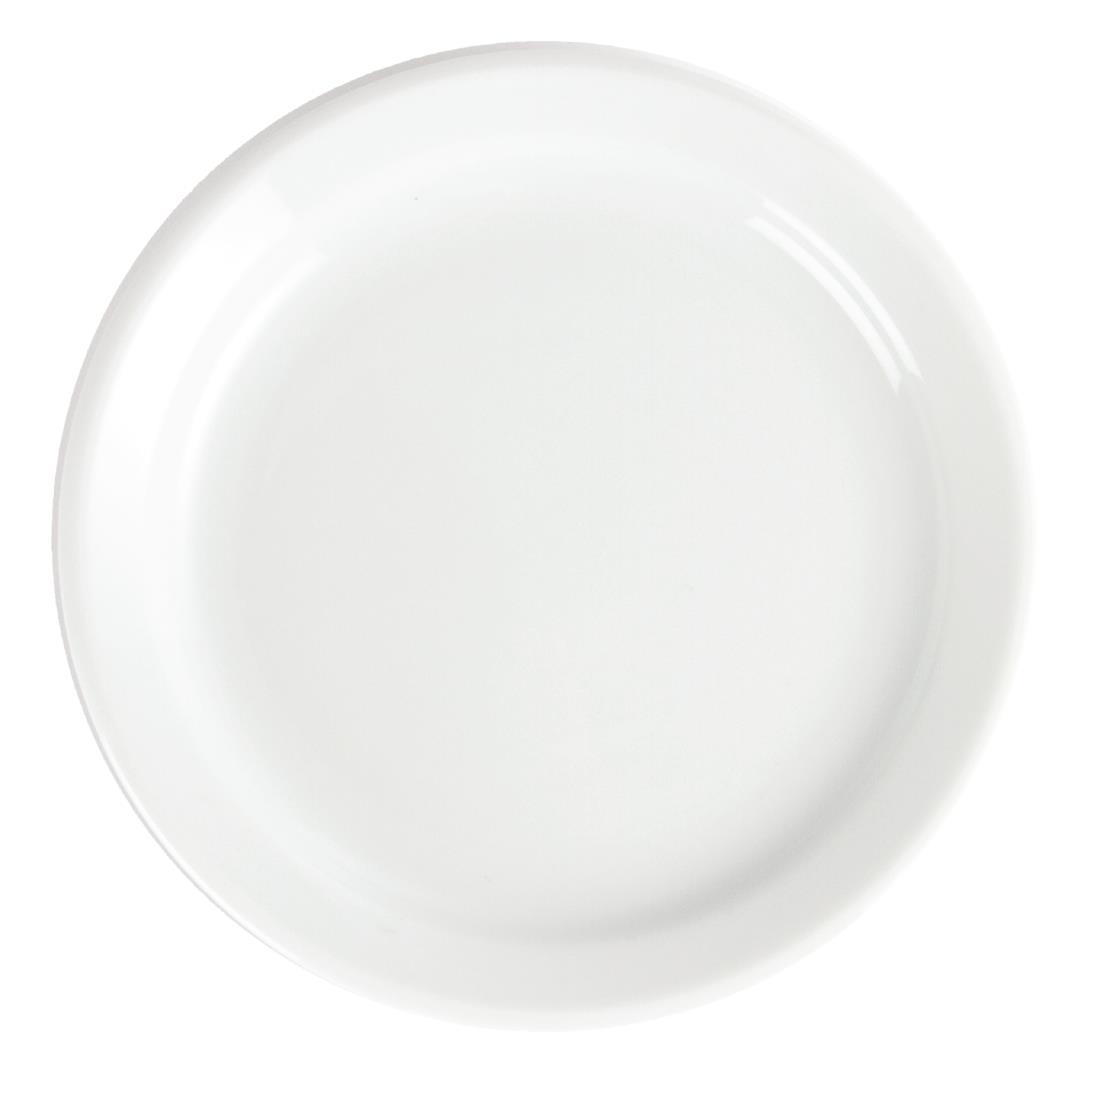 Olympia Whiteware Narrow Rimmed Plates 180mm (Pack of 12) - CB487  - 4